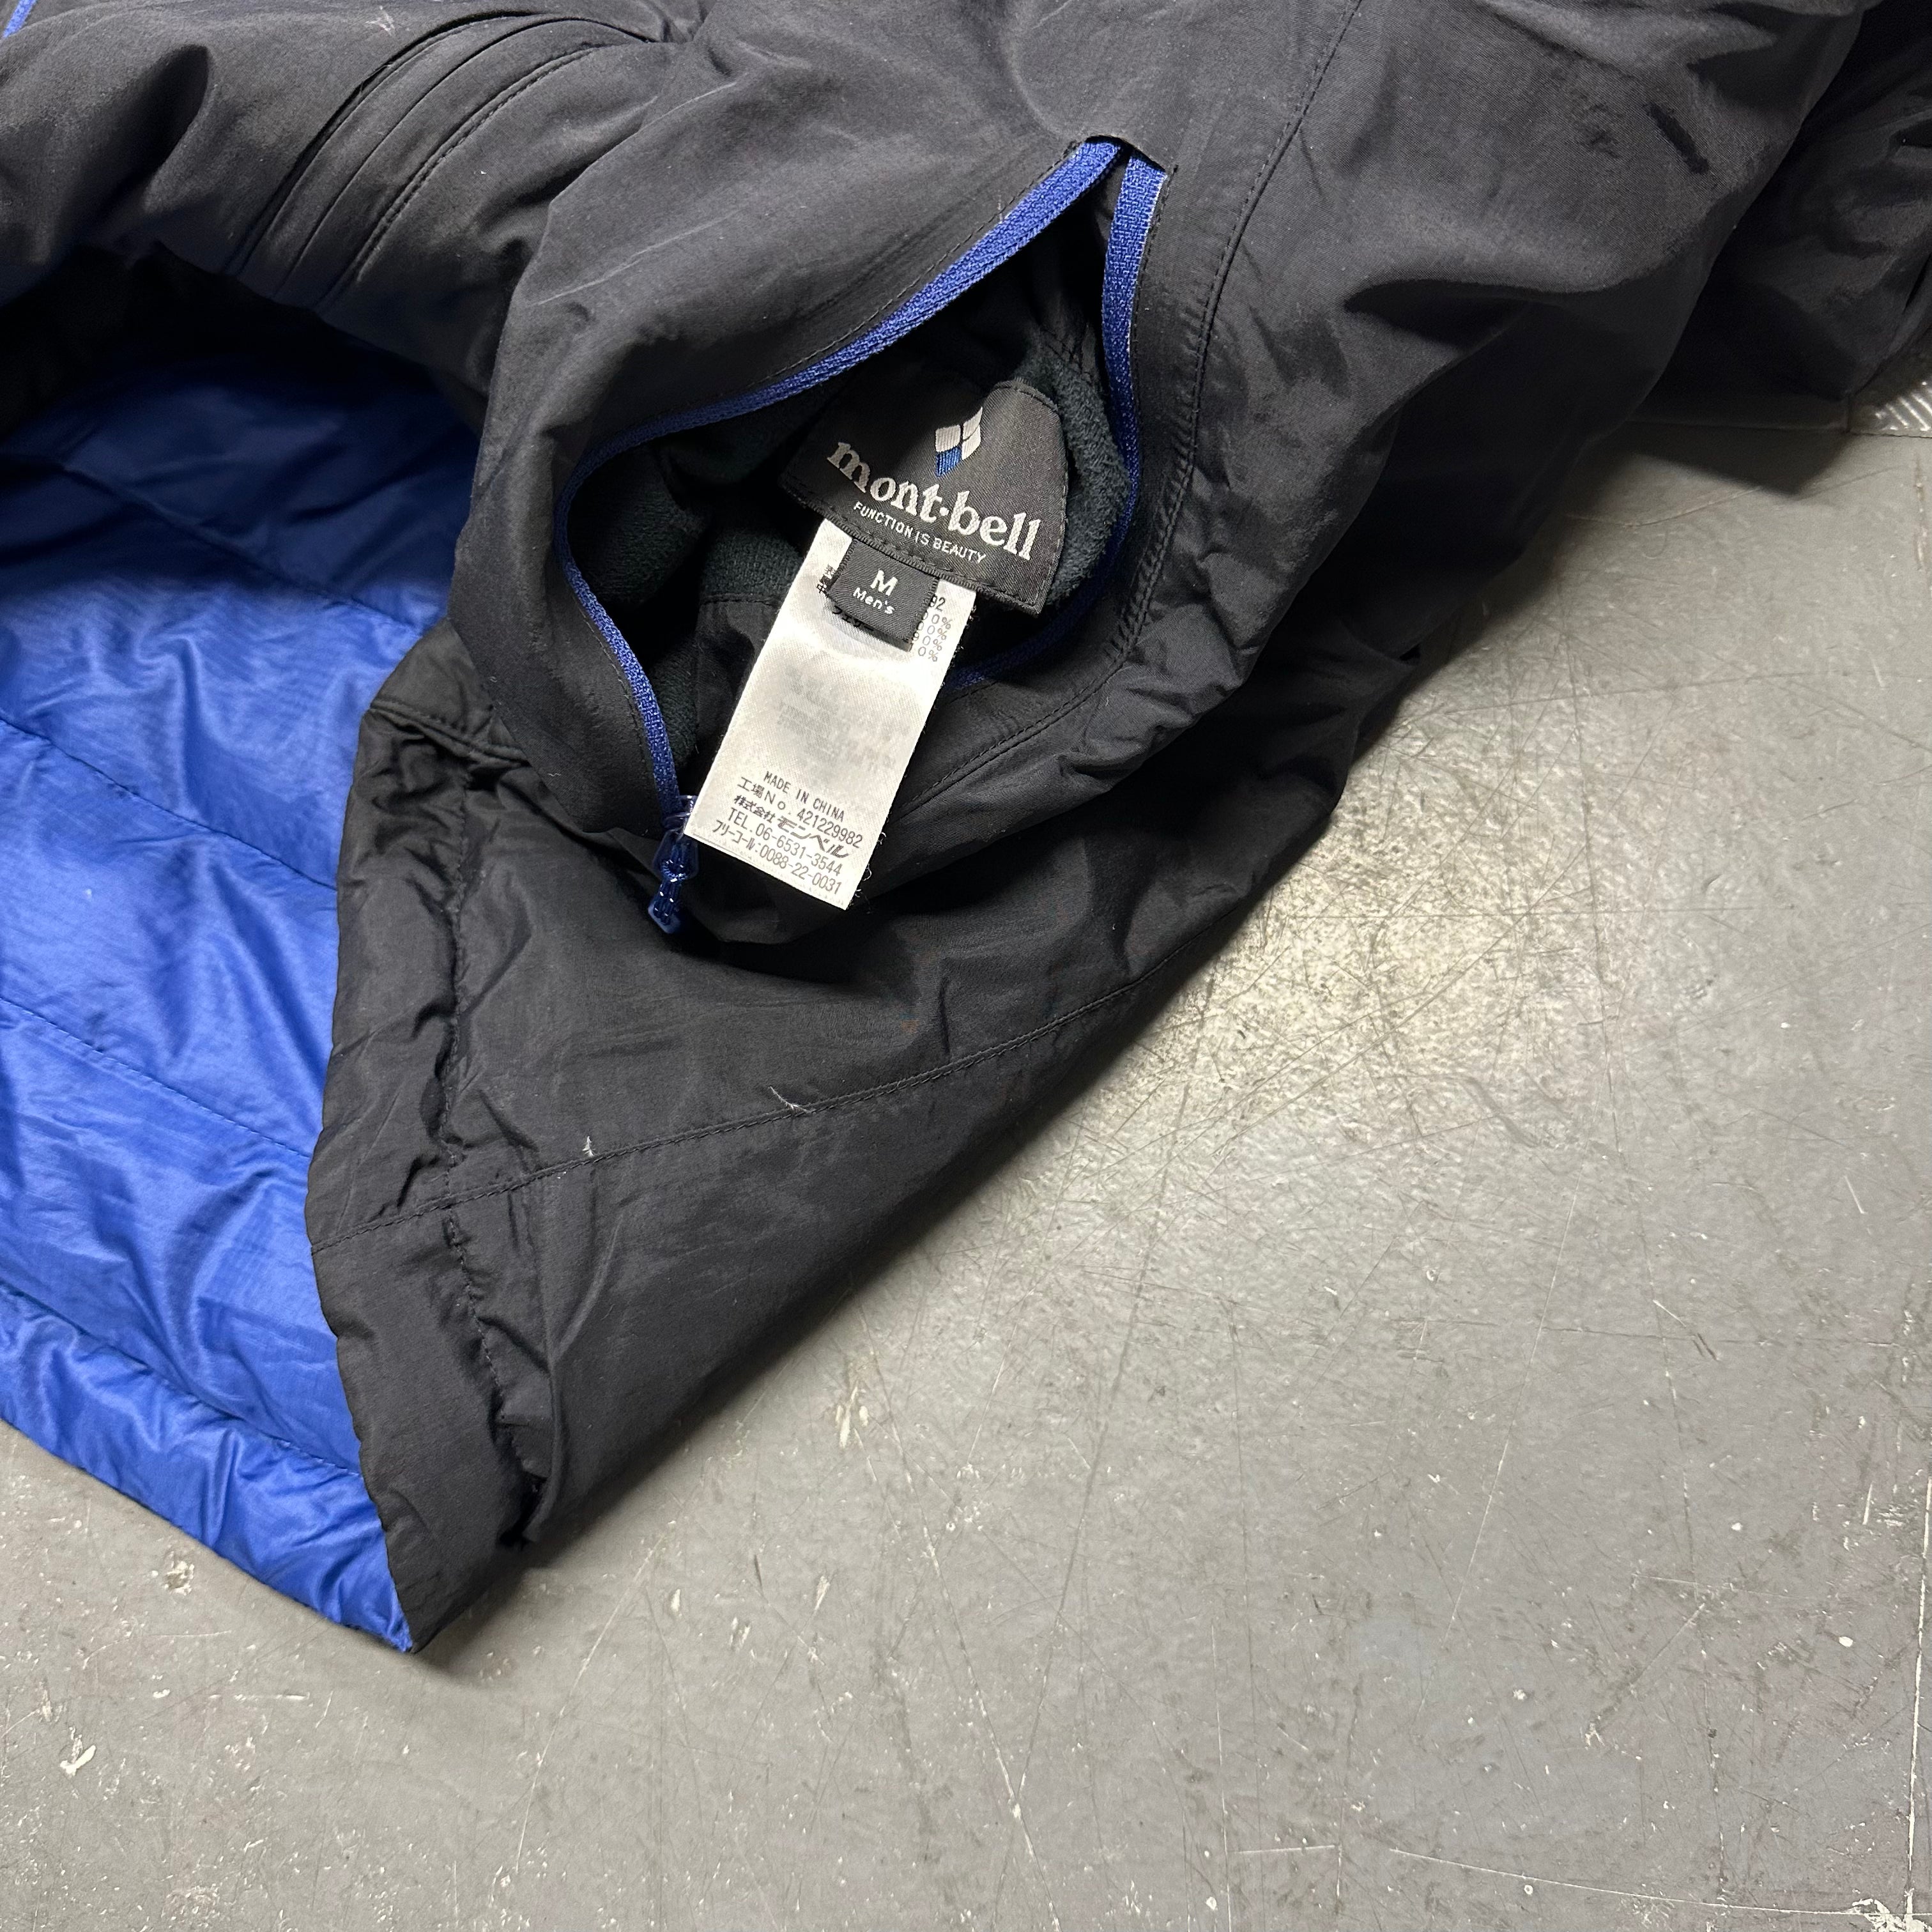 Montbell Reversible Down Puffer Jacket In Blue & Black ( M )